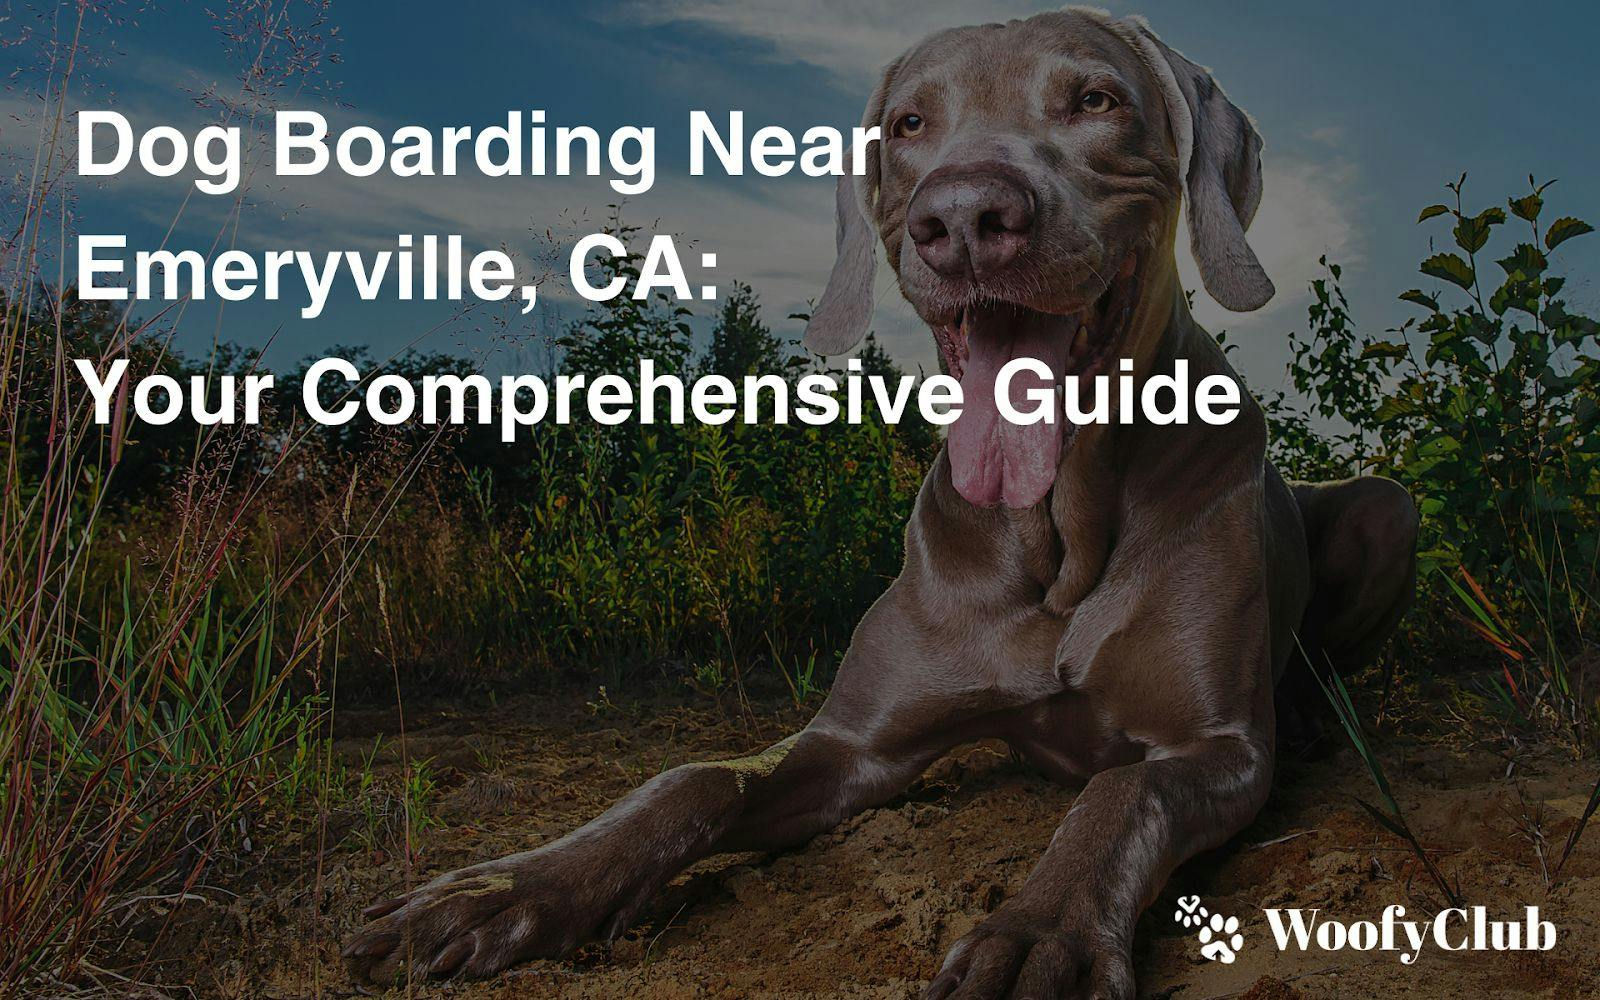 Dog Boarding Near Emeryville, CA: Your Comprehensive Guide